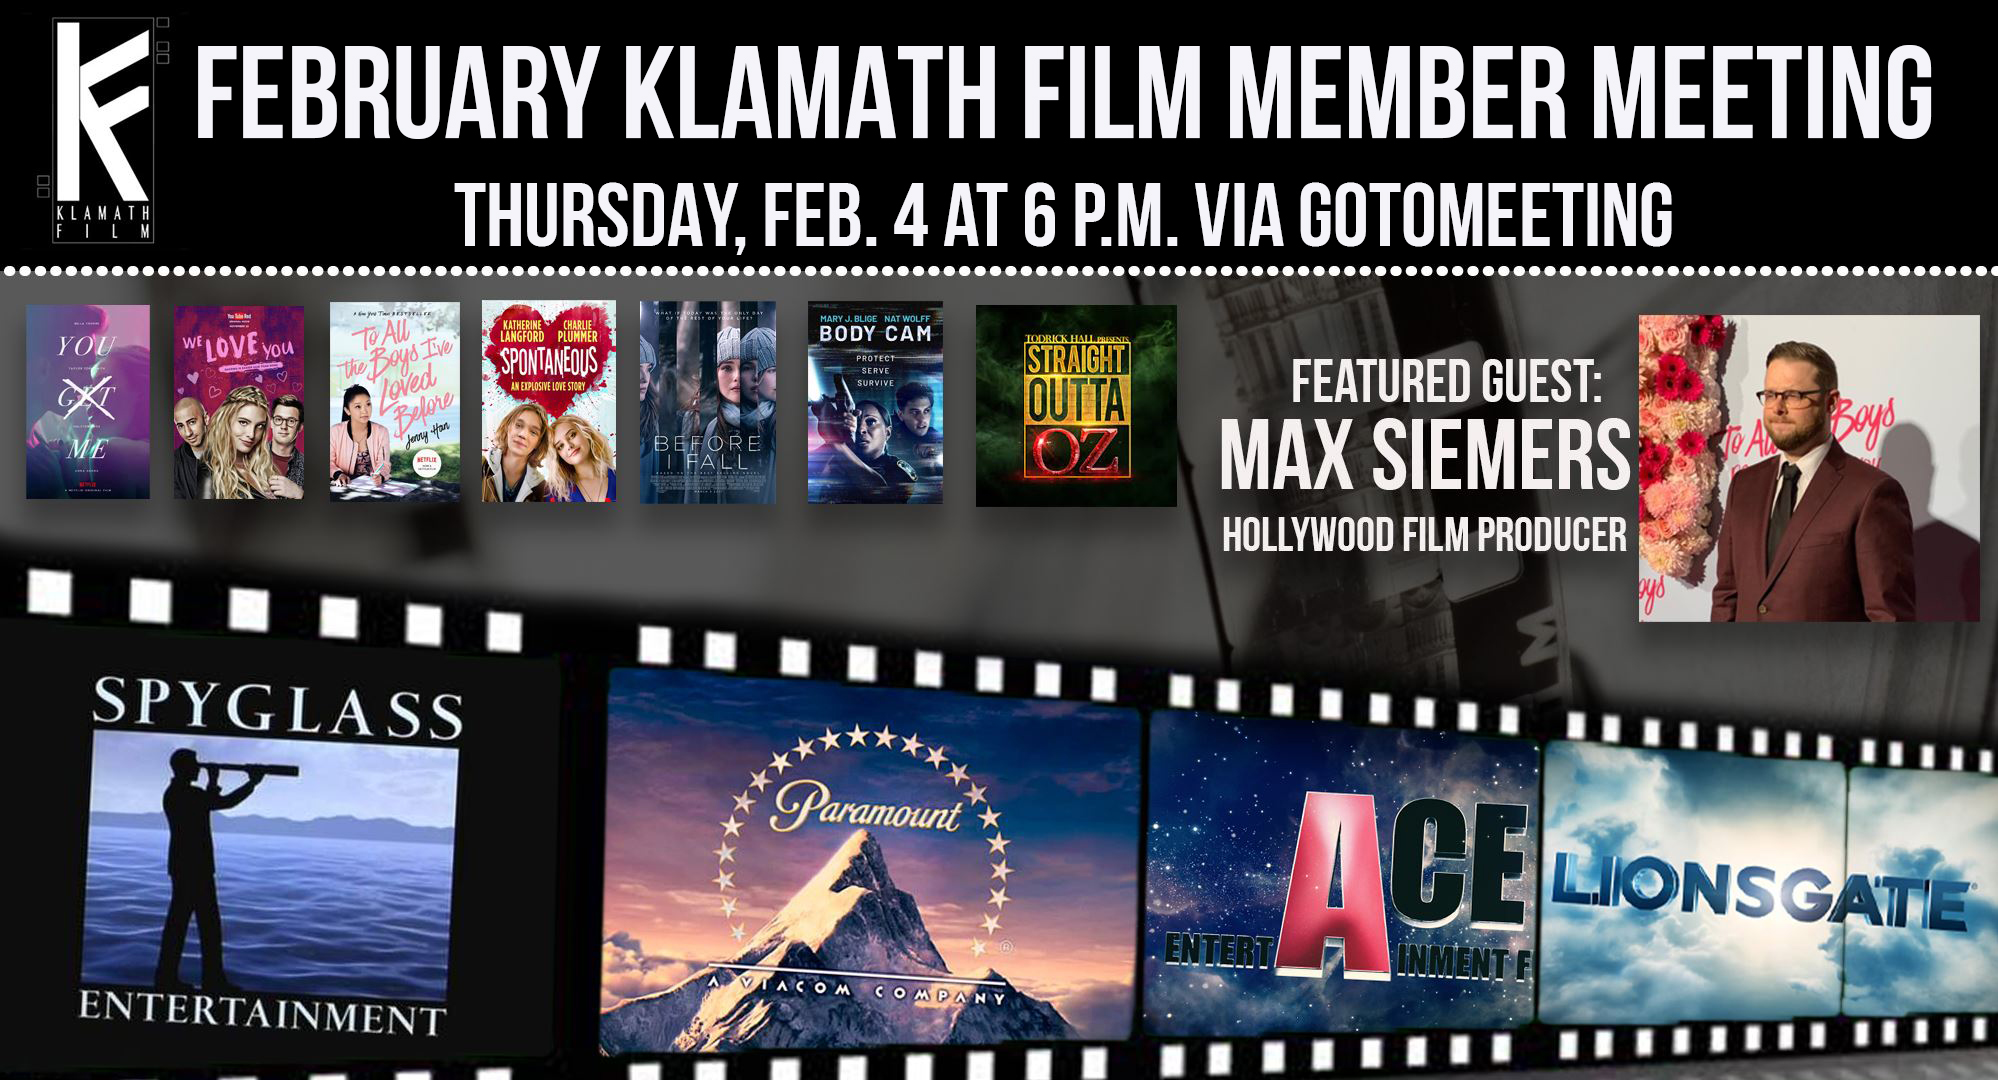 February member meeting to feature chat with Hollywood film producer Max Siemers